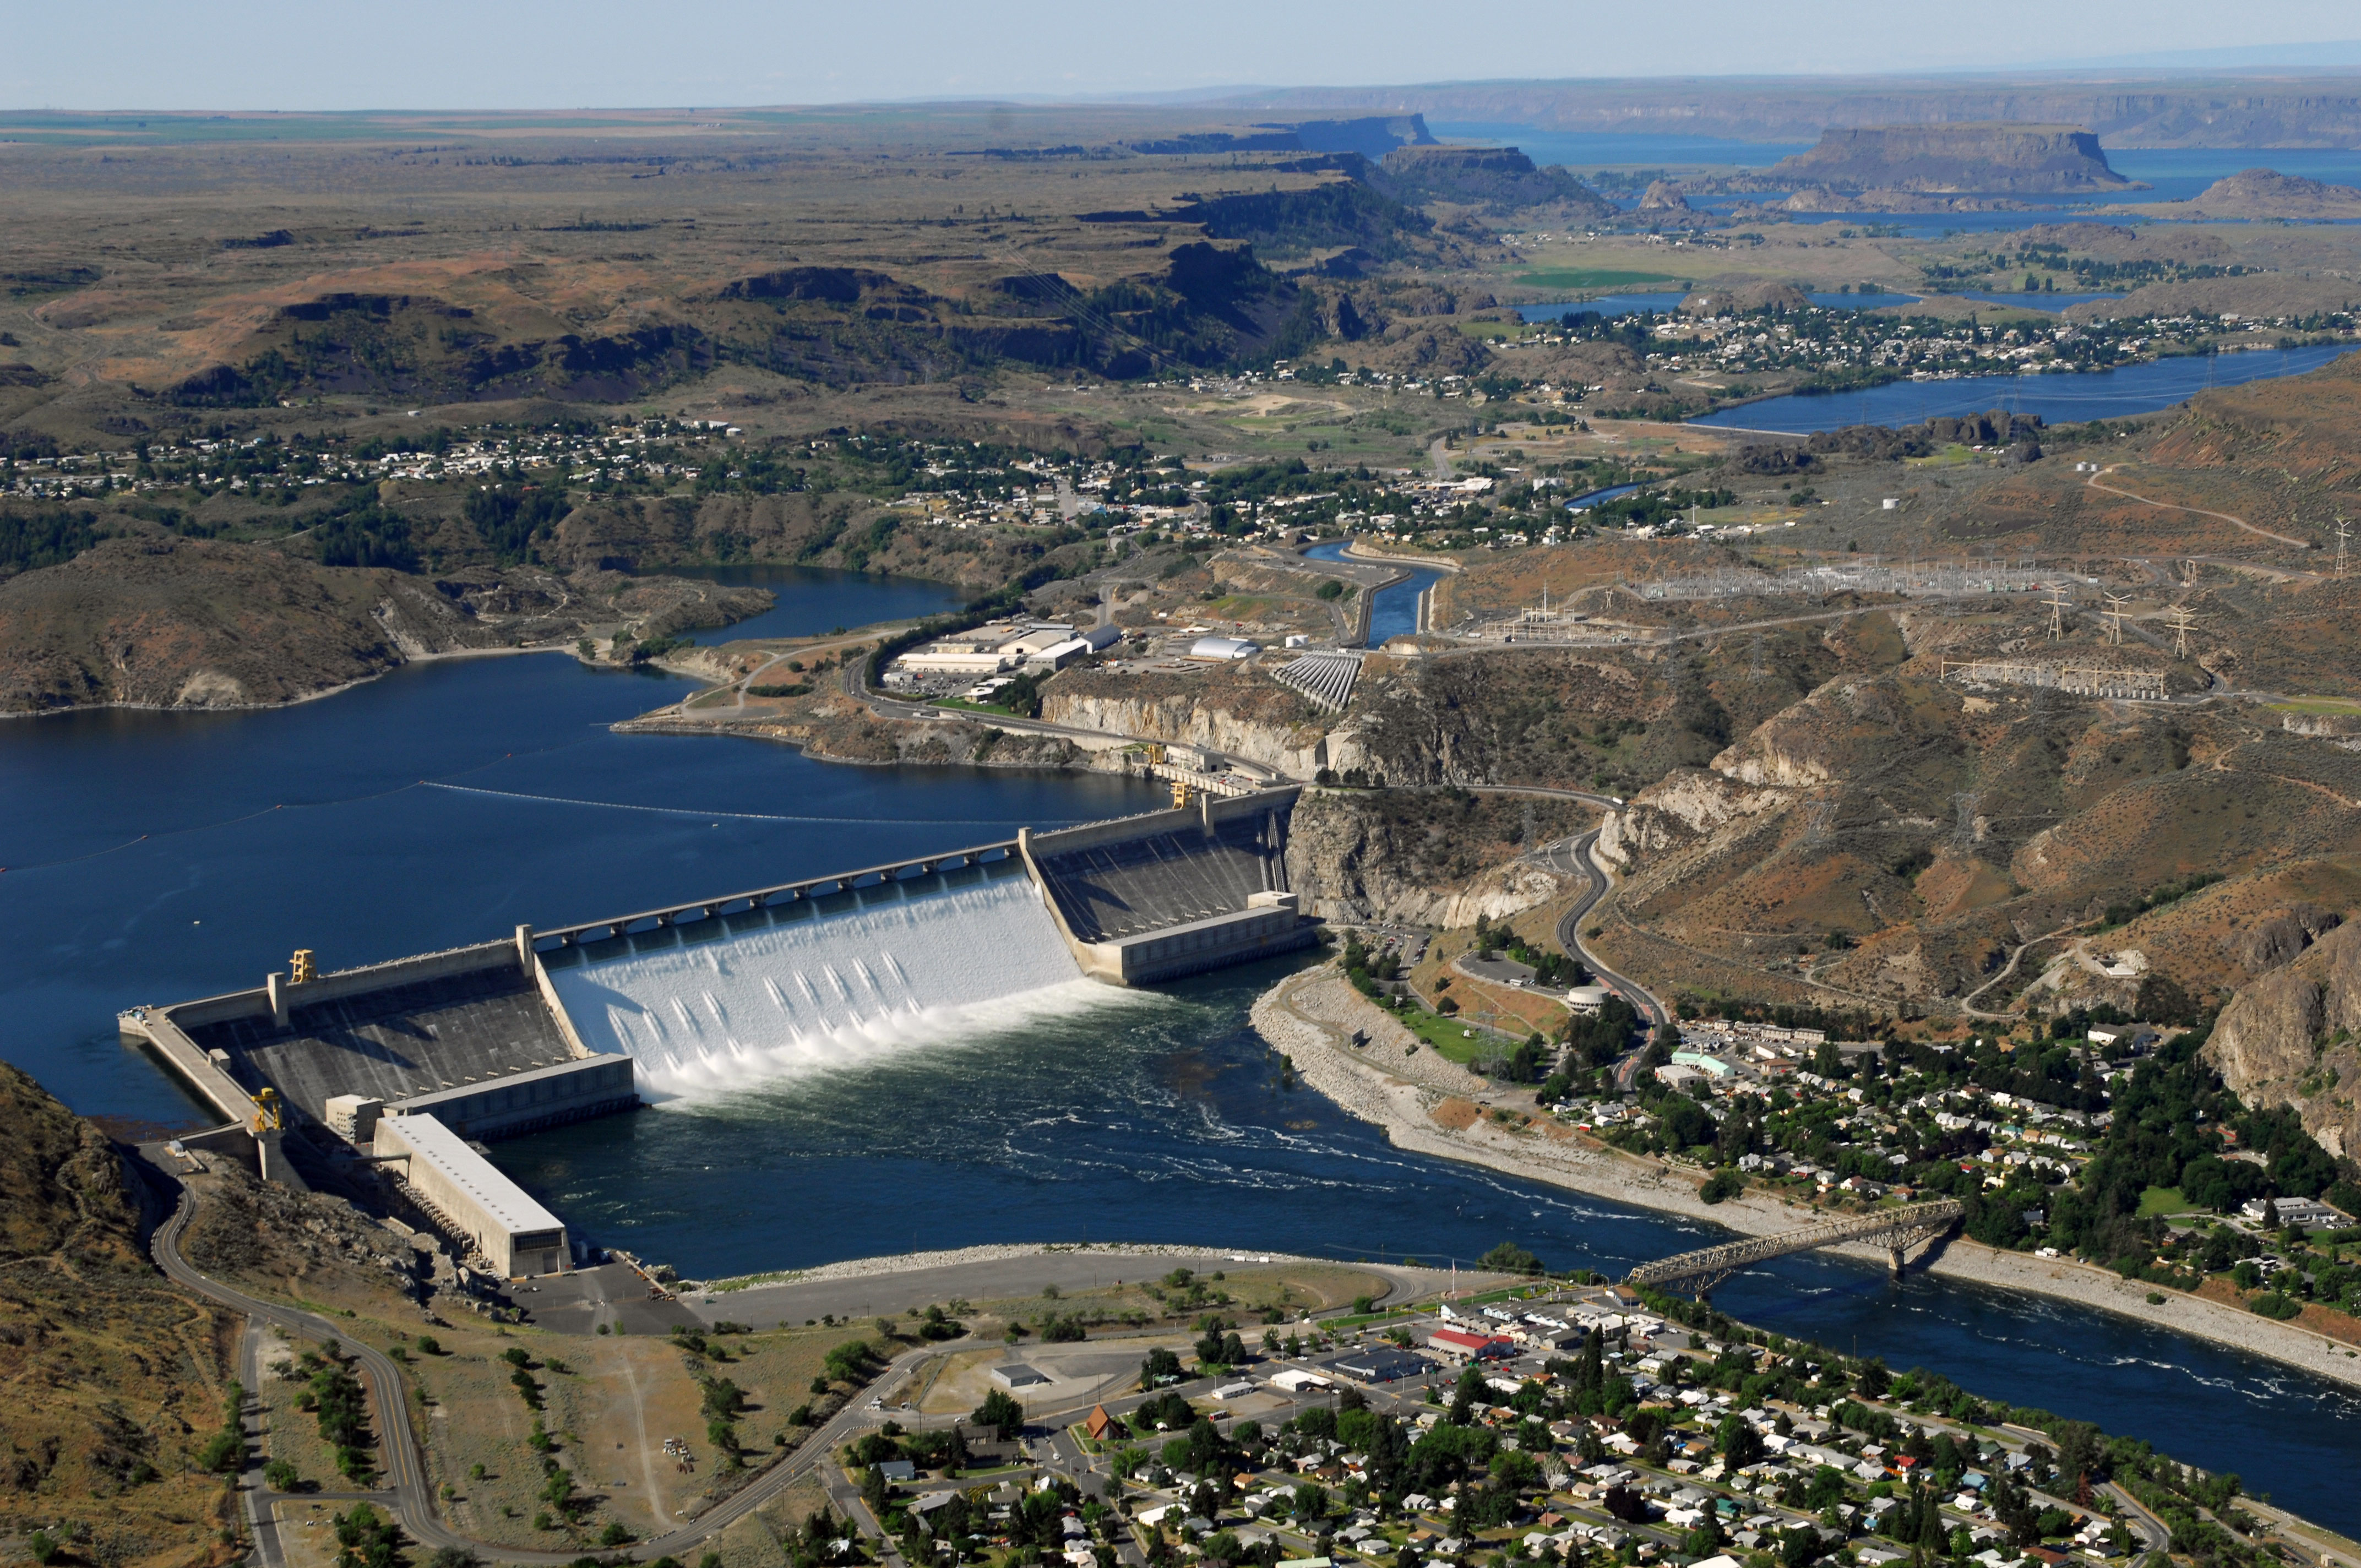 Aerial view of Grand Coulee Dam releasing downstream an unusually large and late spring time water flows of over 200,000 cfs. Broken out, it’s 33,800 cfs, over the spillway and 167,000 cfs through the hydropower generators